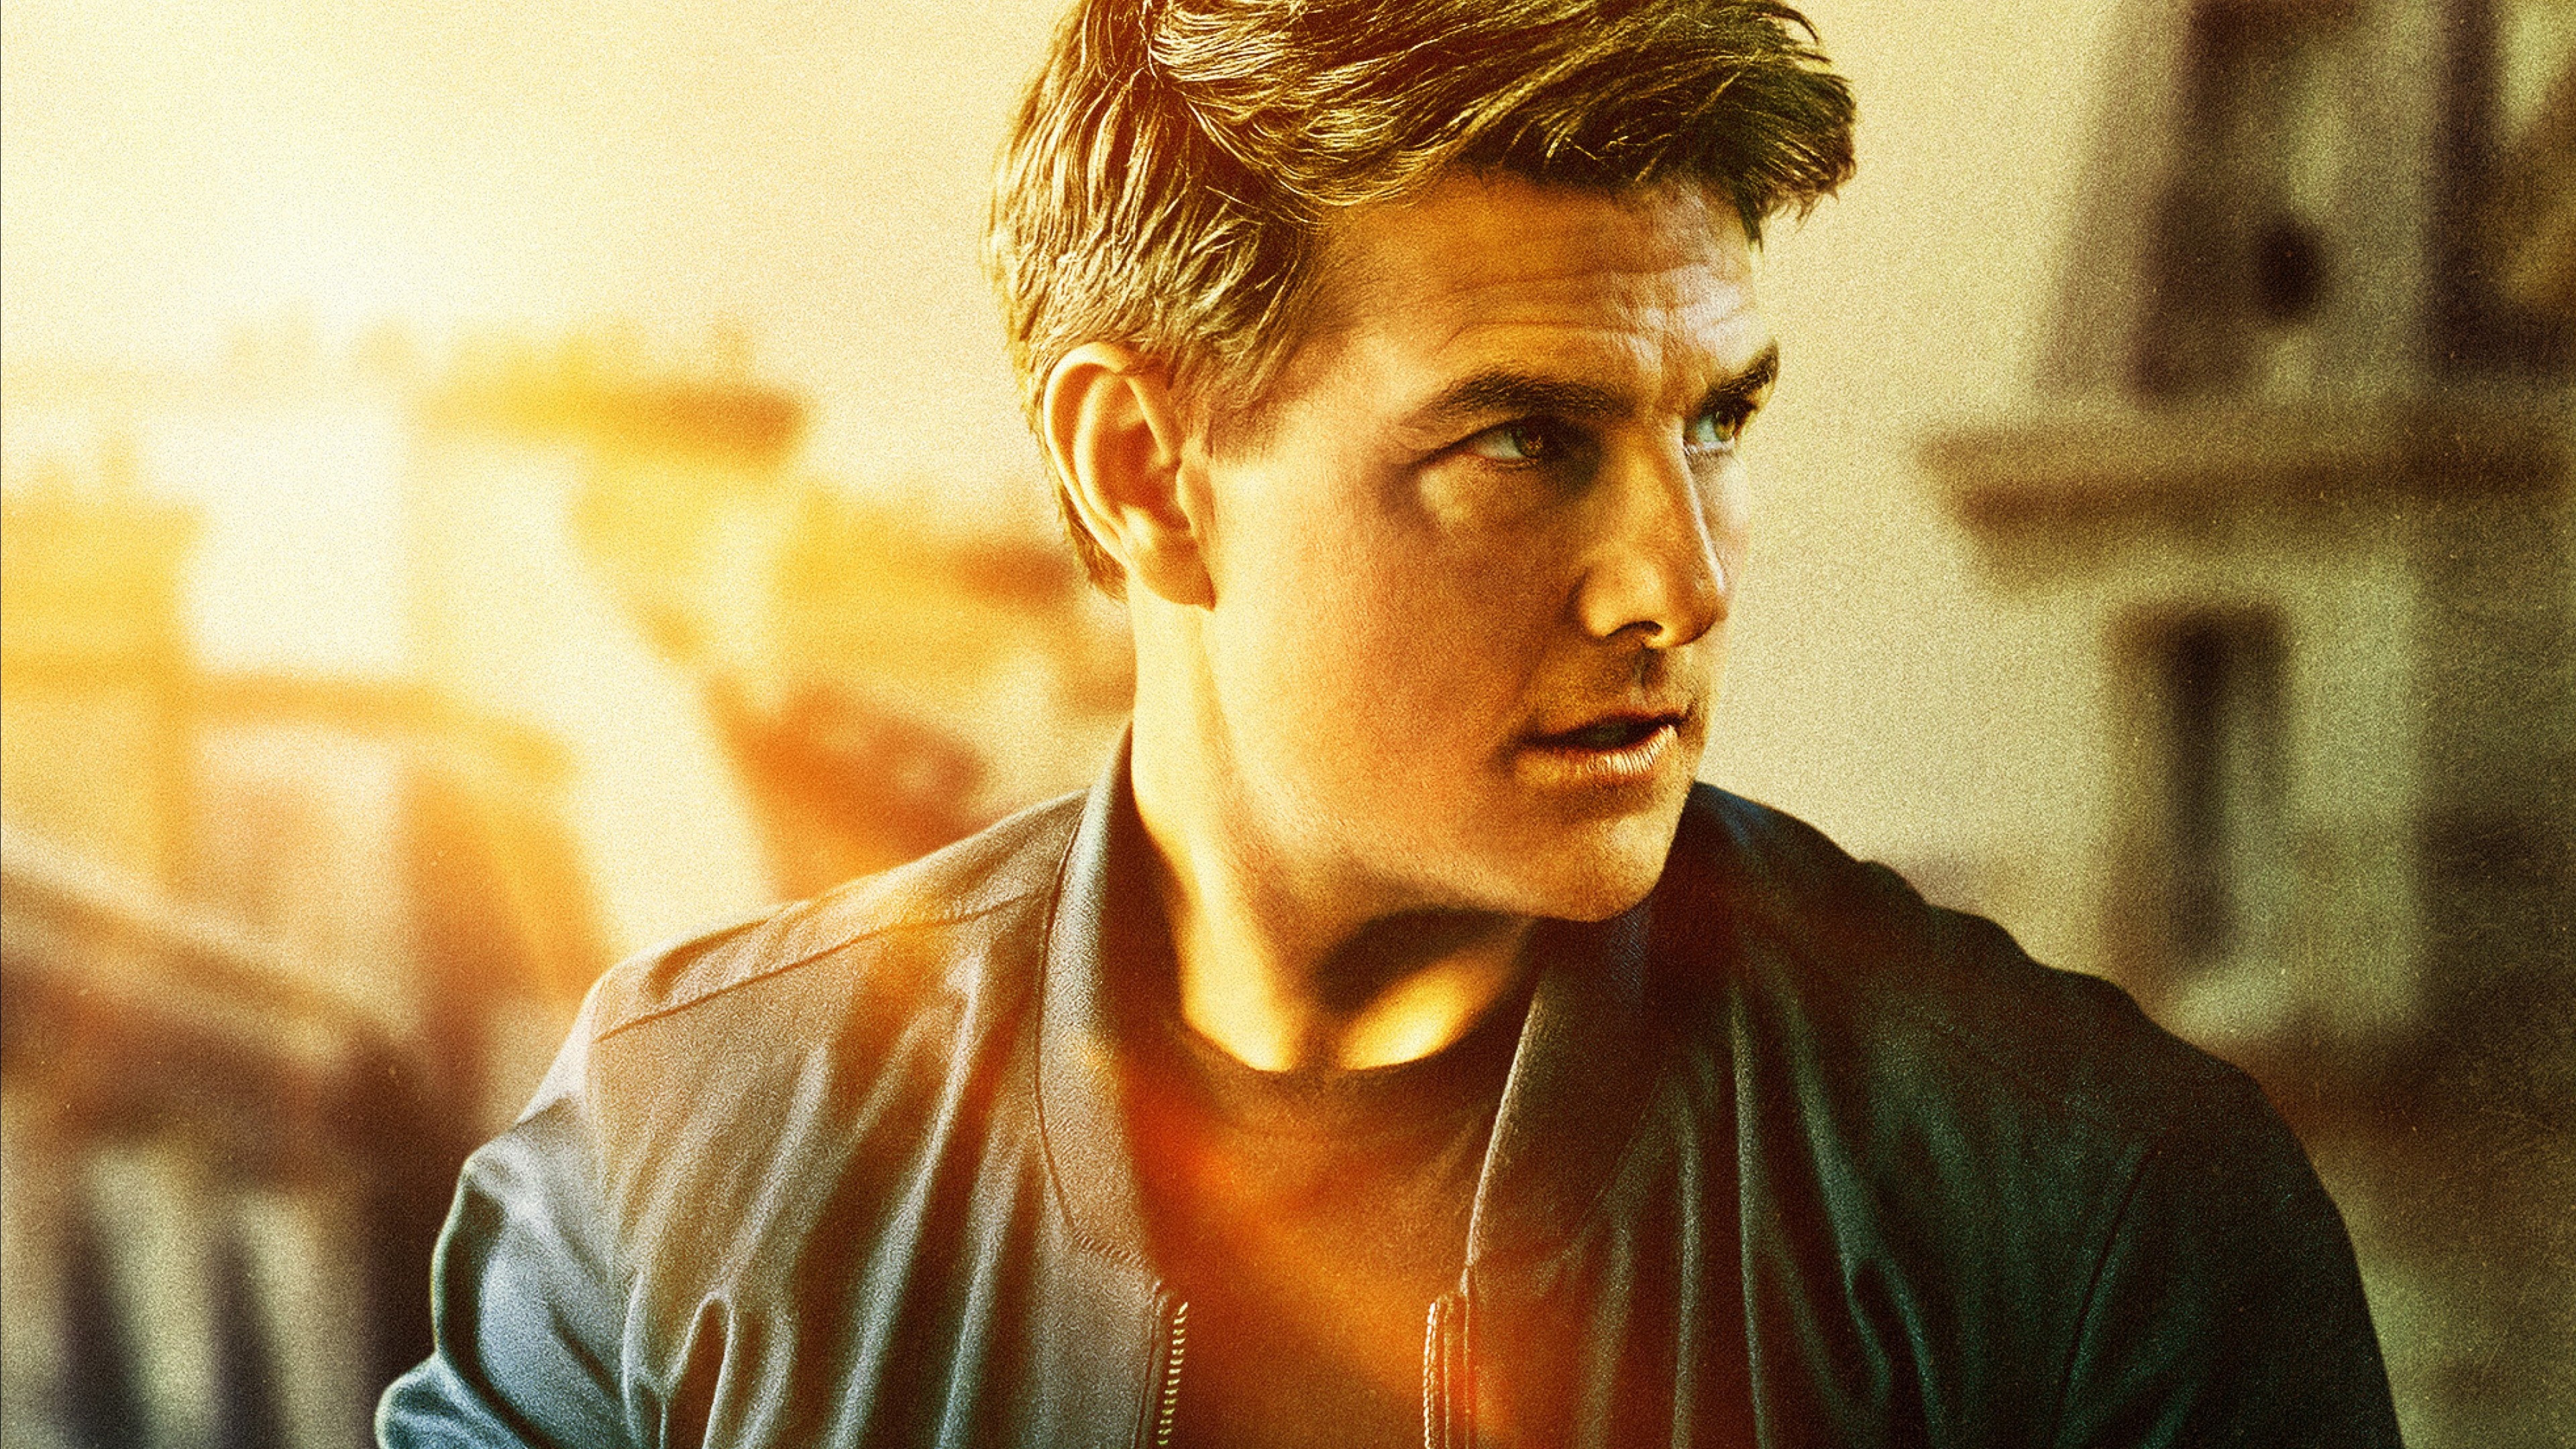 Mission: Impossible Fallout, Tom Cruise at his best, 4K movie wallpaper perfection, 3840x2160 4K Desktop